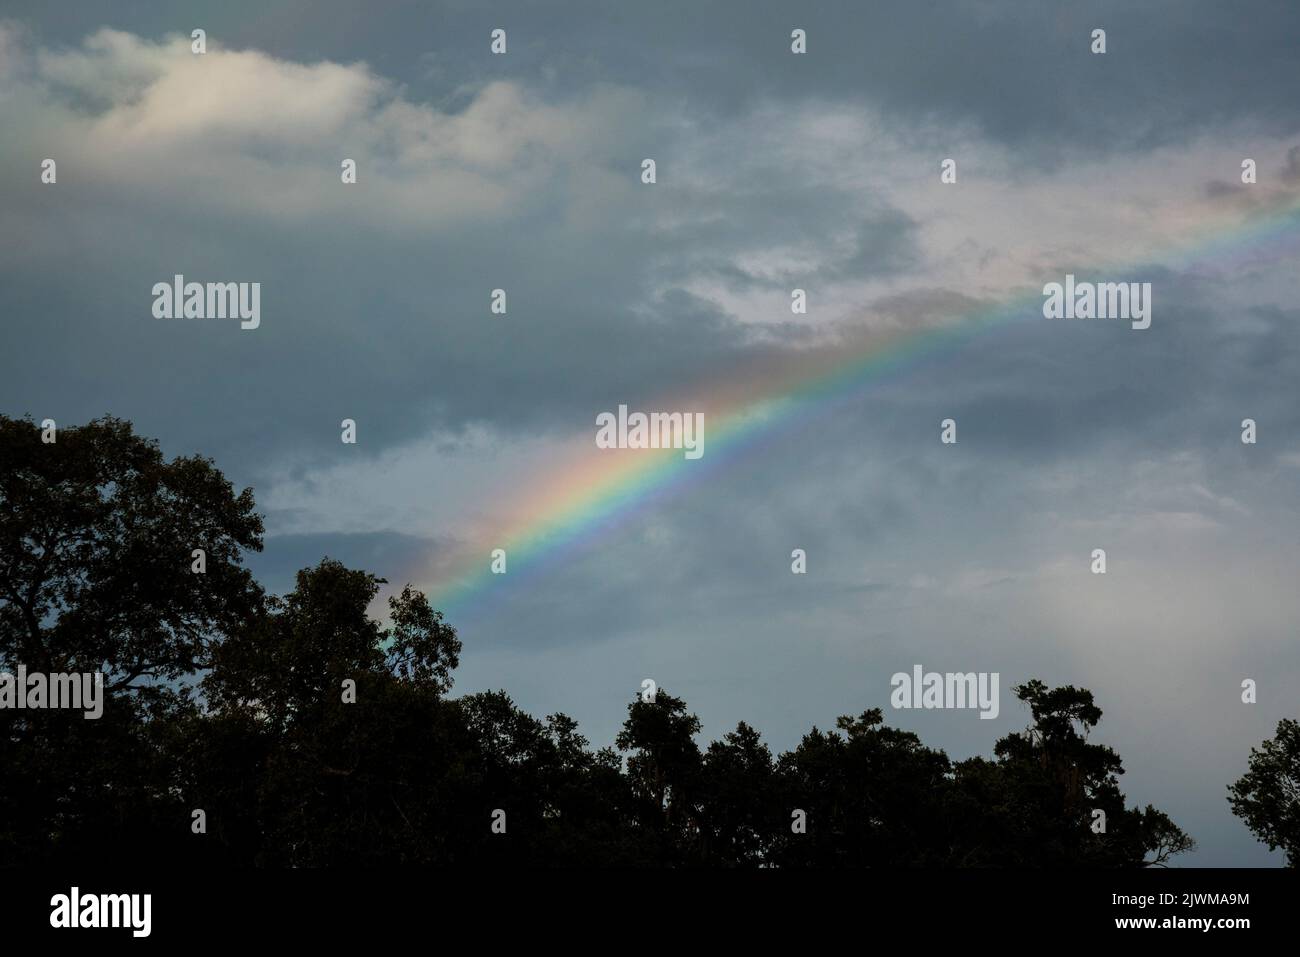 After a cloudy and stormy day, a rainbow starts to appear over North Central Florida. Stock Photo